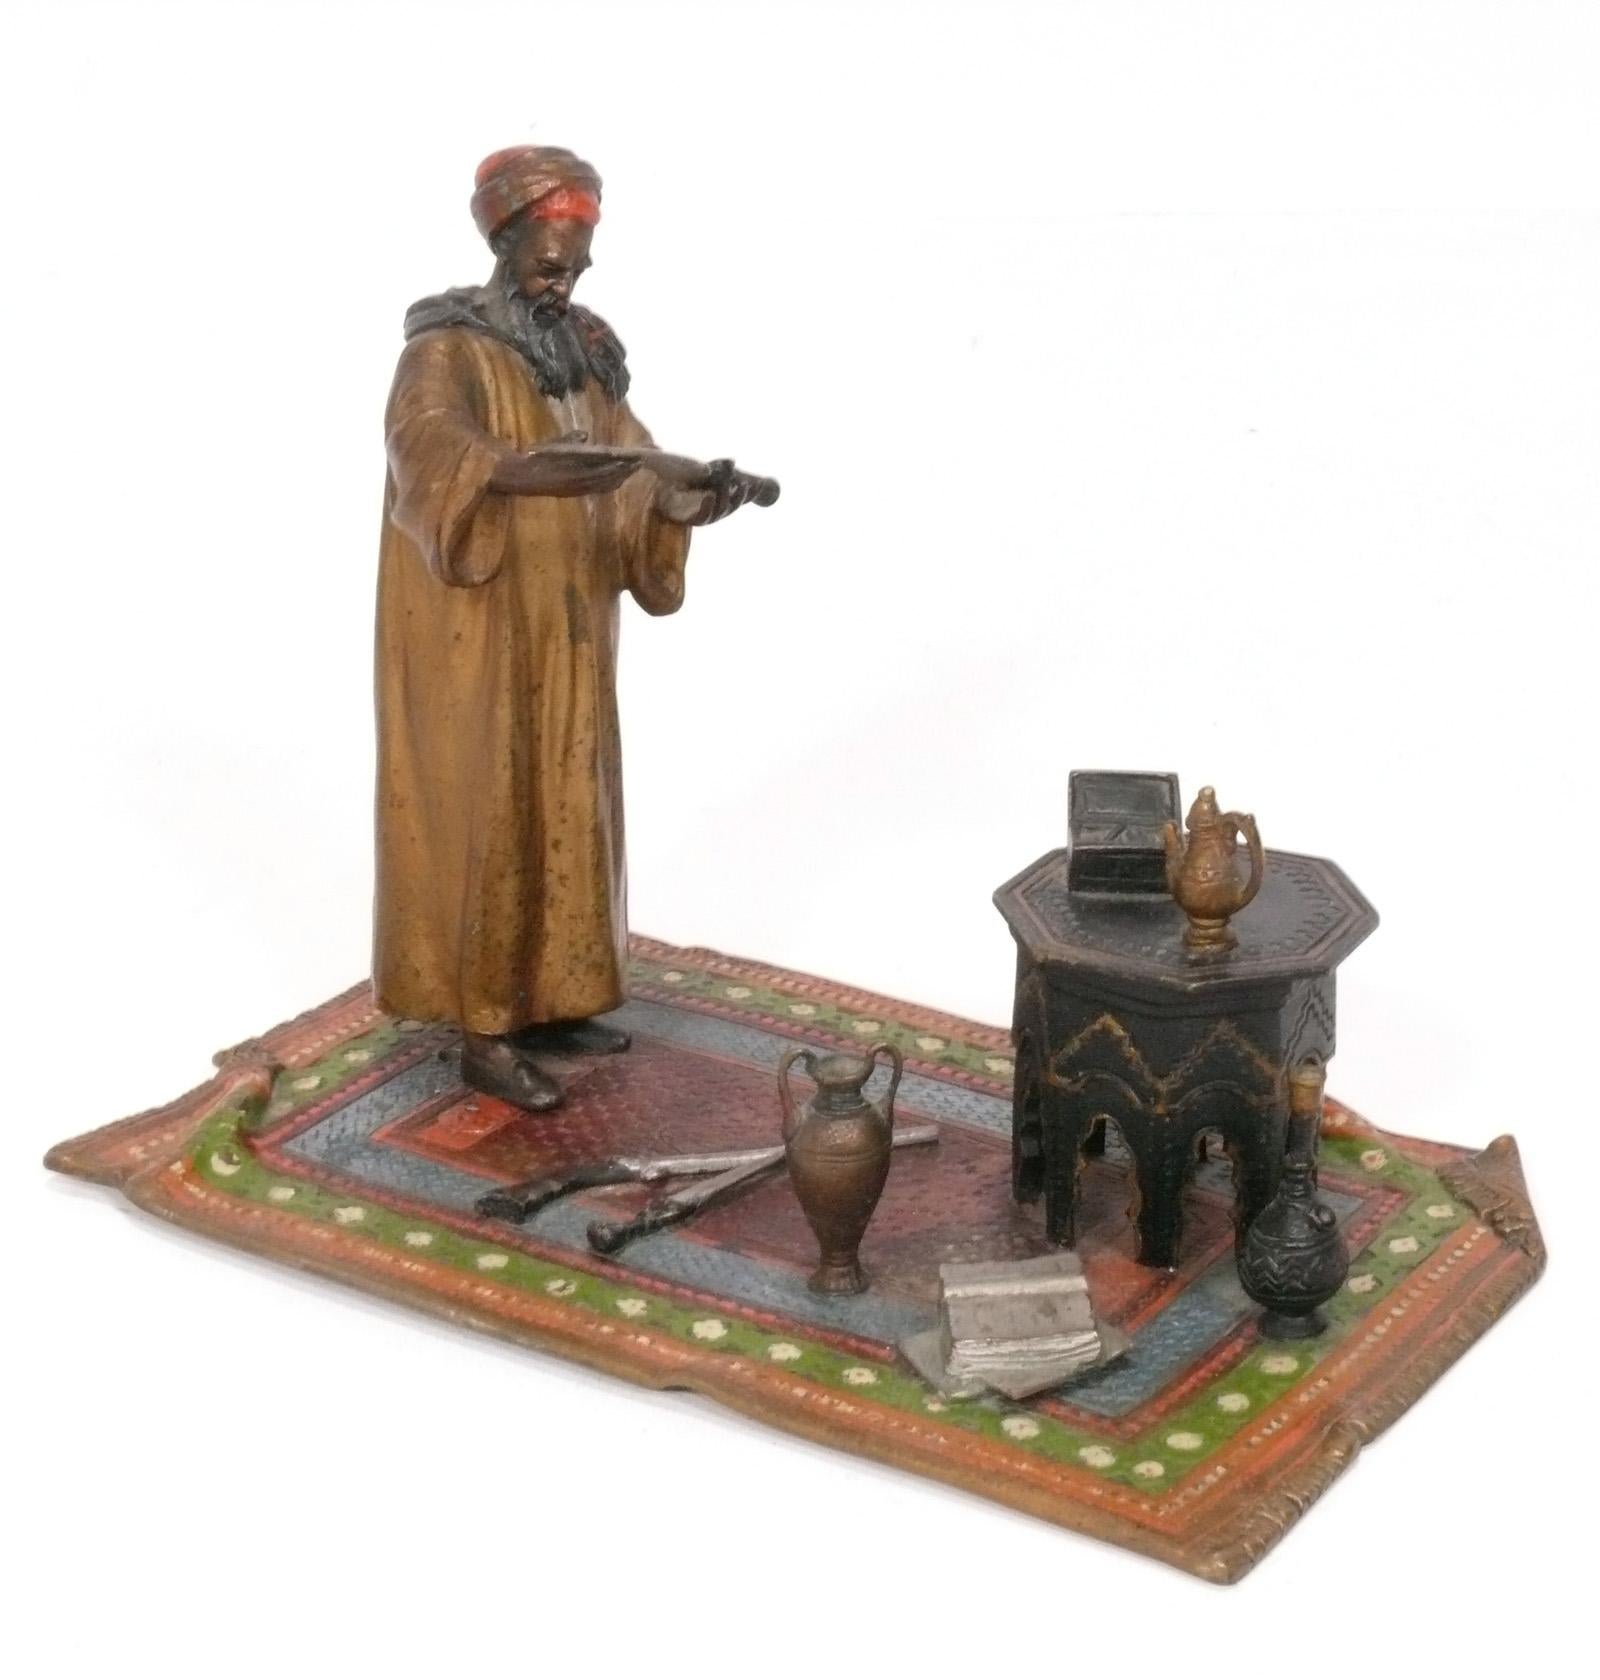 Well Made Cold Painted Orientalist Merchant Sculpture, attributed to Hans Xaver Bergman, Vienna, Austria, circa late 19th Century. It is stamped 